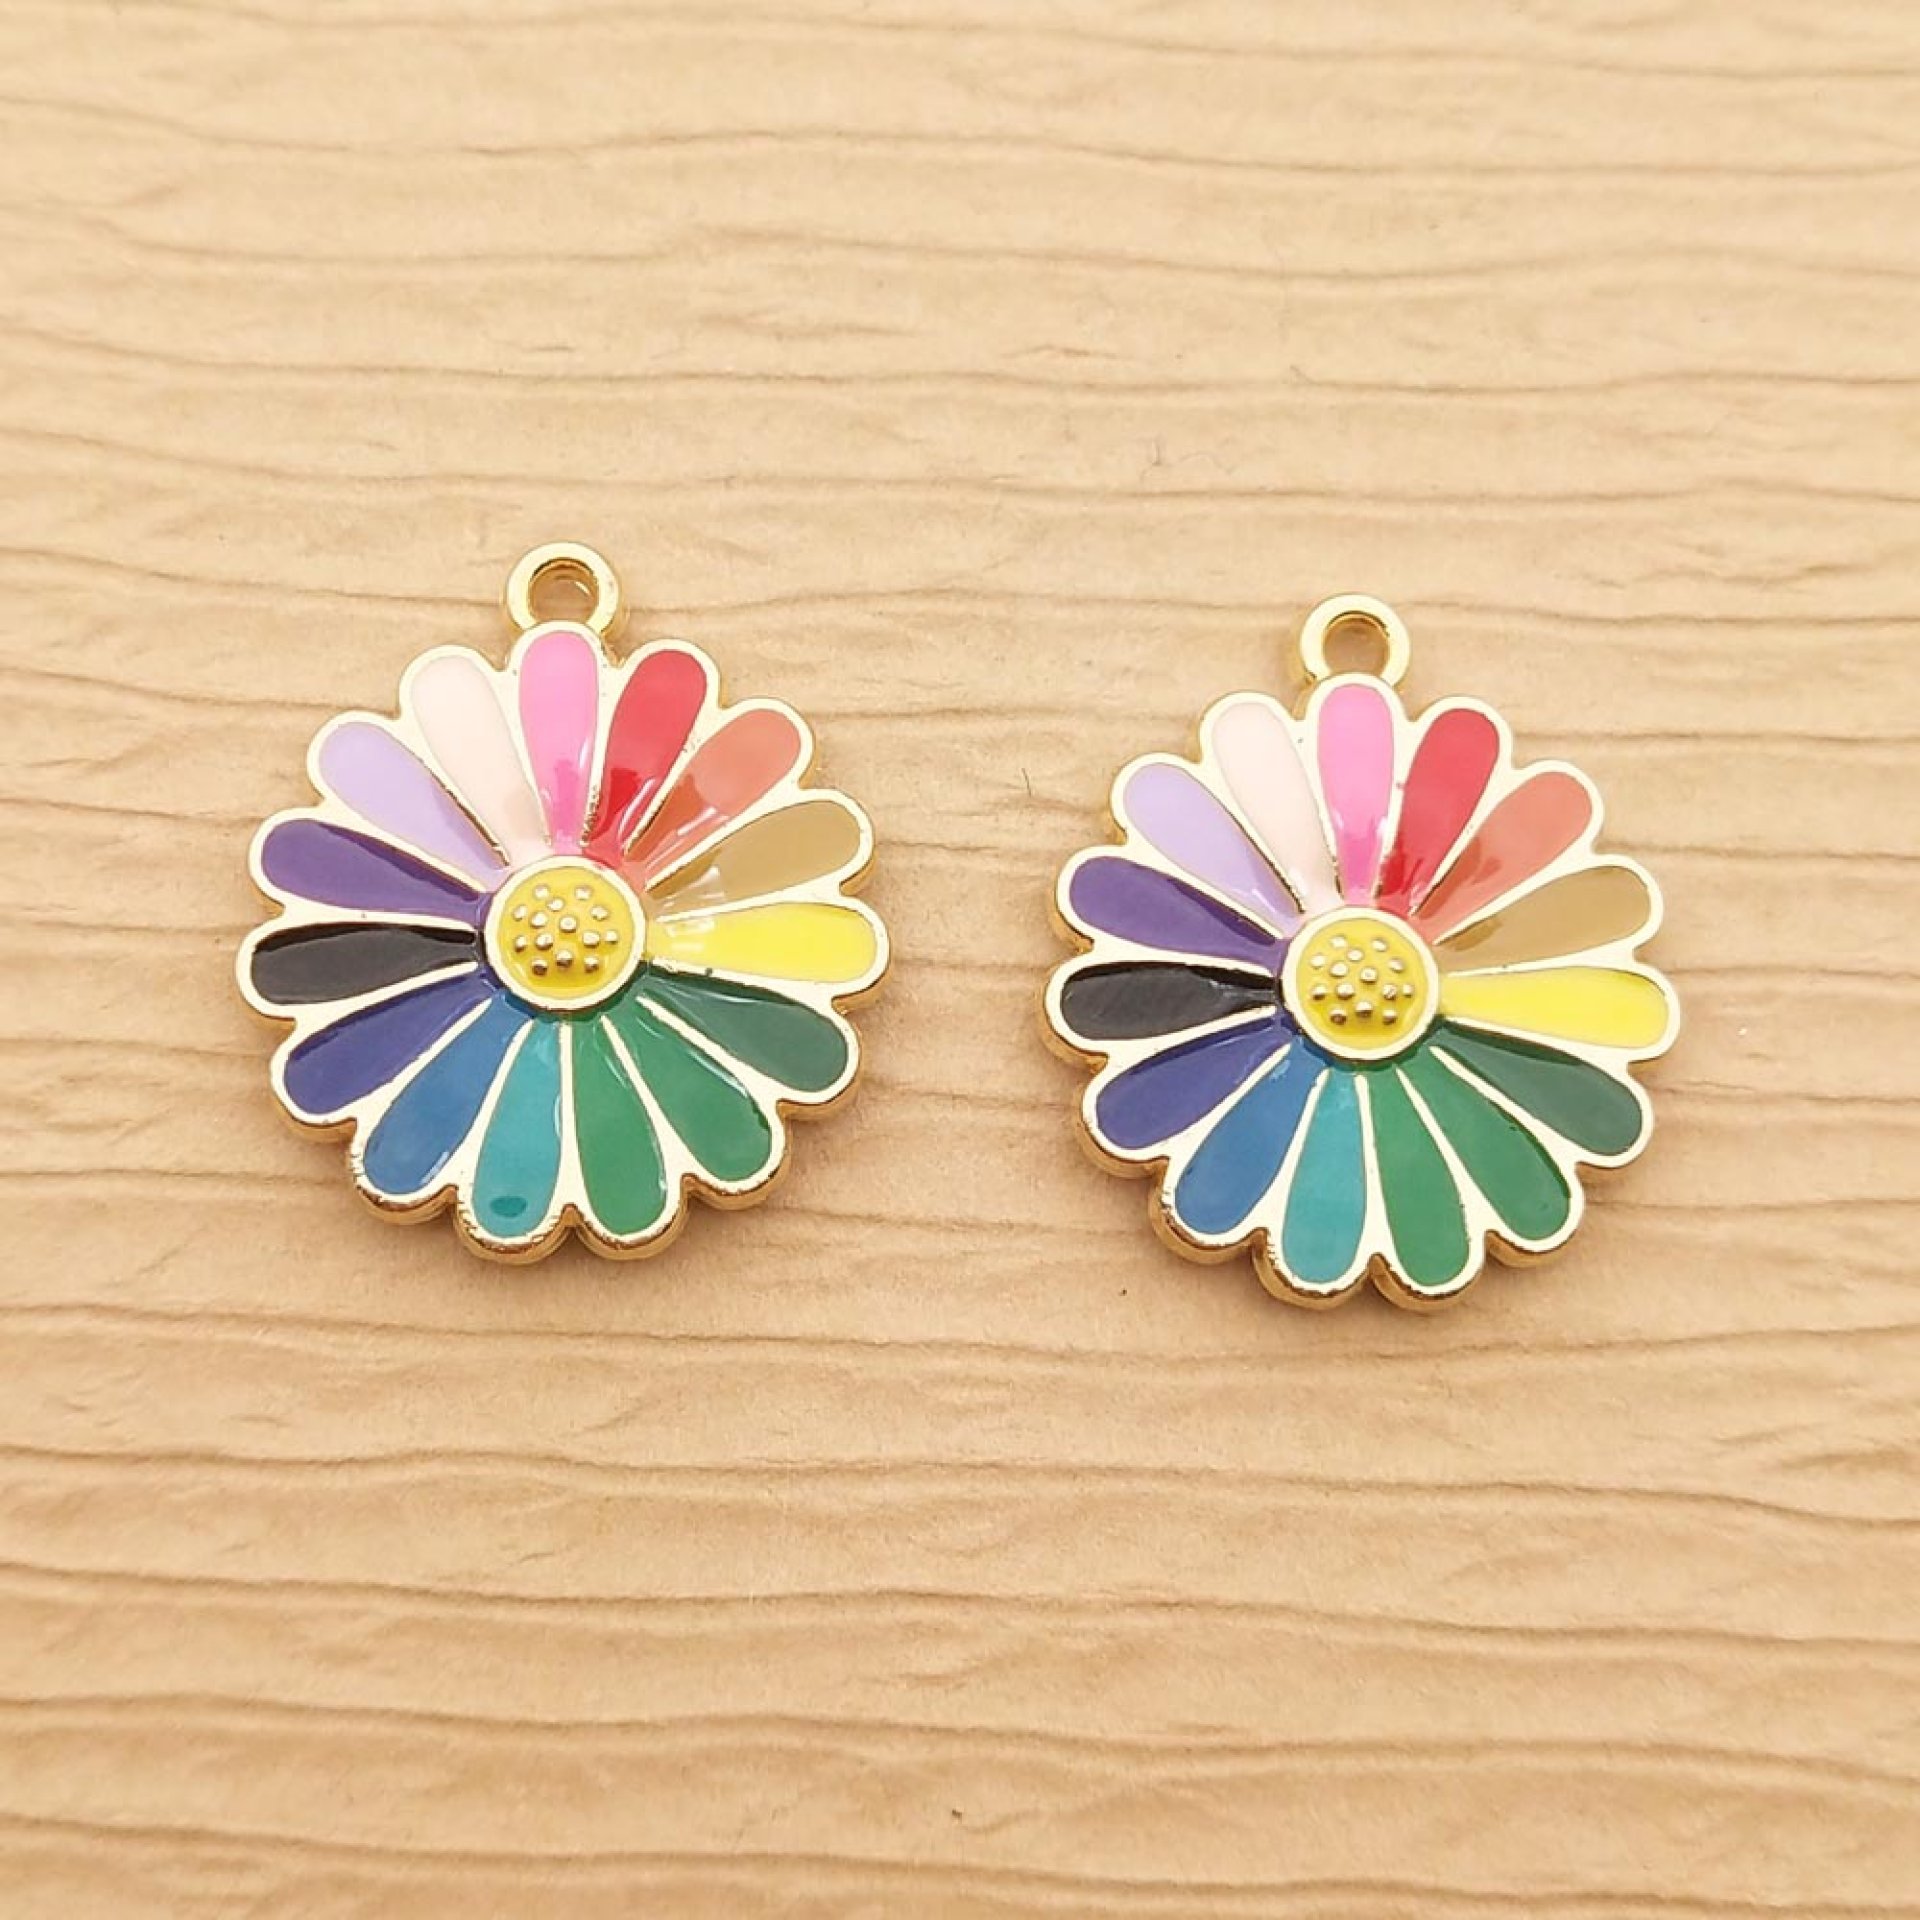 10pcs Enamel Flower Charm for Jewelry Making Supplies Necklace Pendant  Earring Charms Diy Craft Accessories Metal Materials - ArtistPose - Shop  for special, extraordinary items, from unique handcrafted pieces to unique  art.